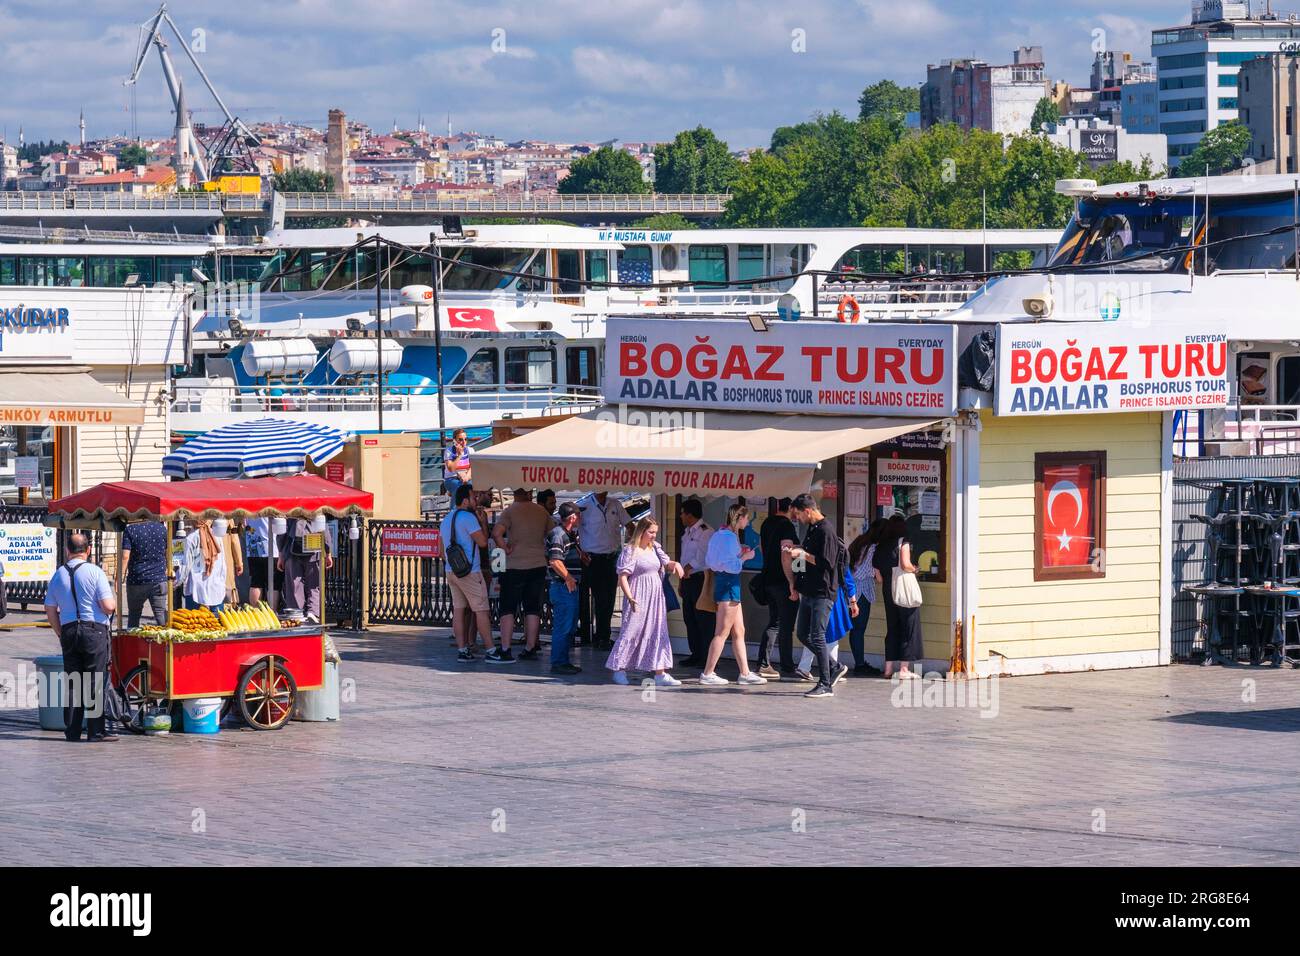 Istanbul, Turkey, Türkiye. Ticket Office for Bosphorus Boat Tours, Refreshment Stand on left Offering Roasted Corn and Chestnuts. Stock Photo